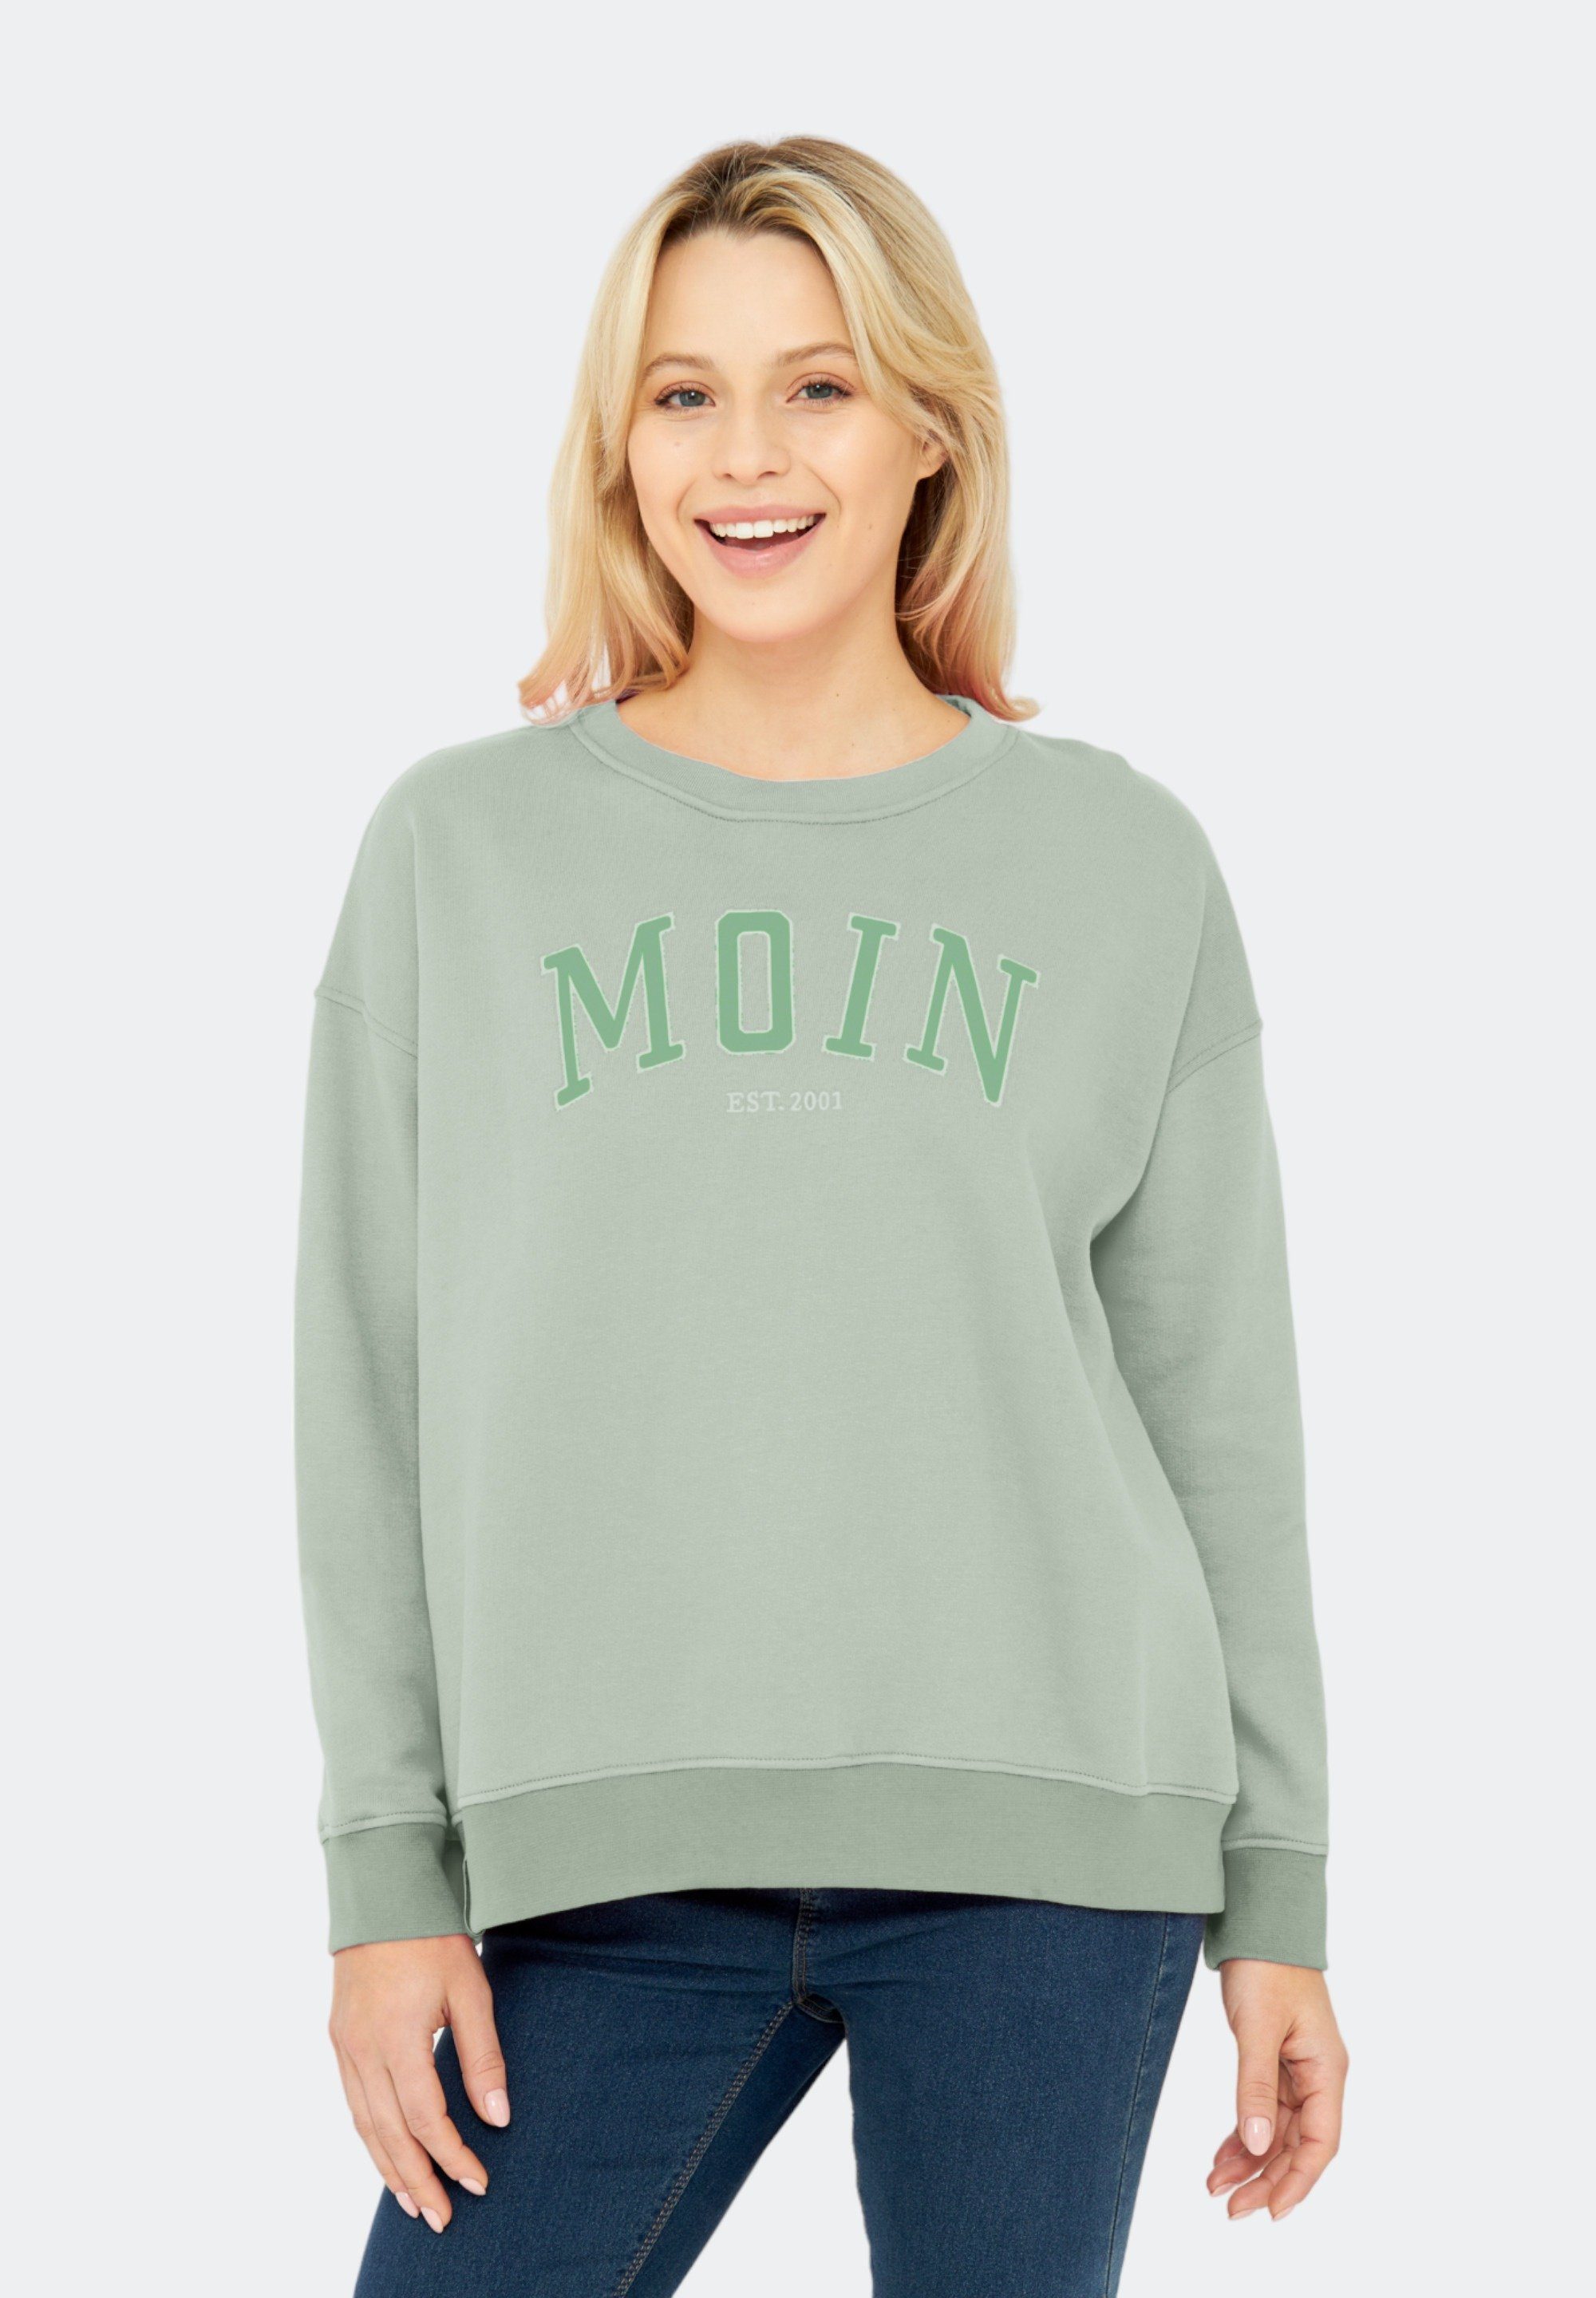 Portugal Derbe Moin in in Made Portual, Sweatshirt Made